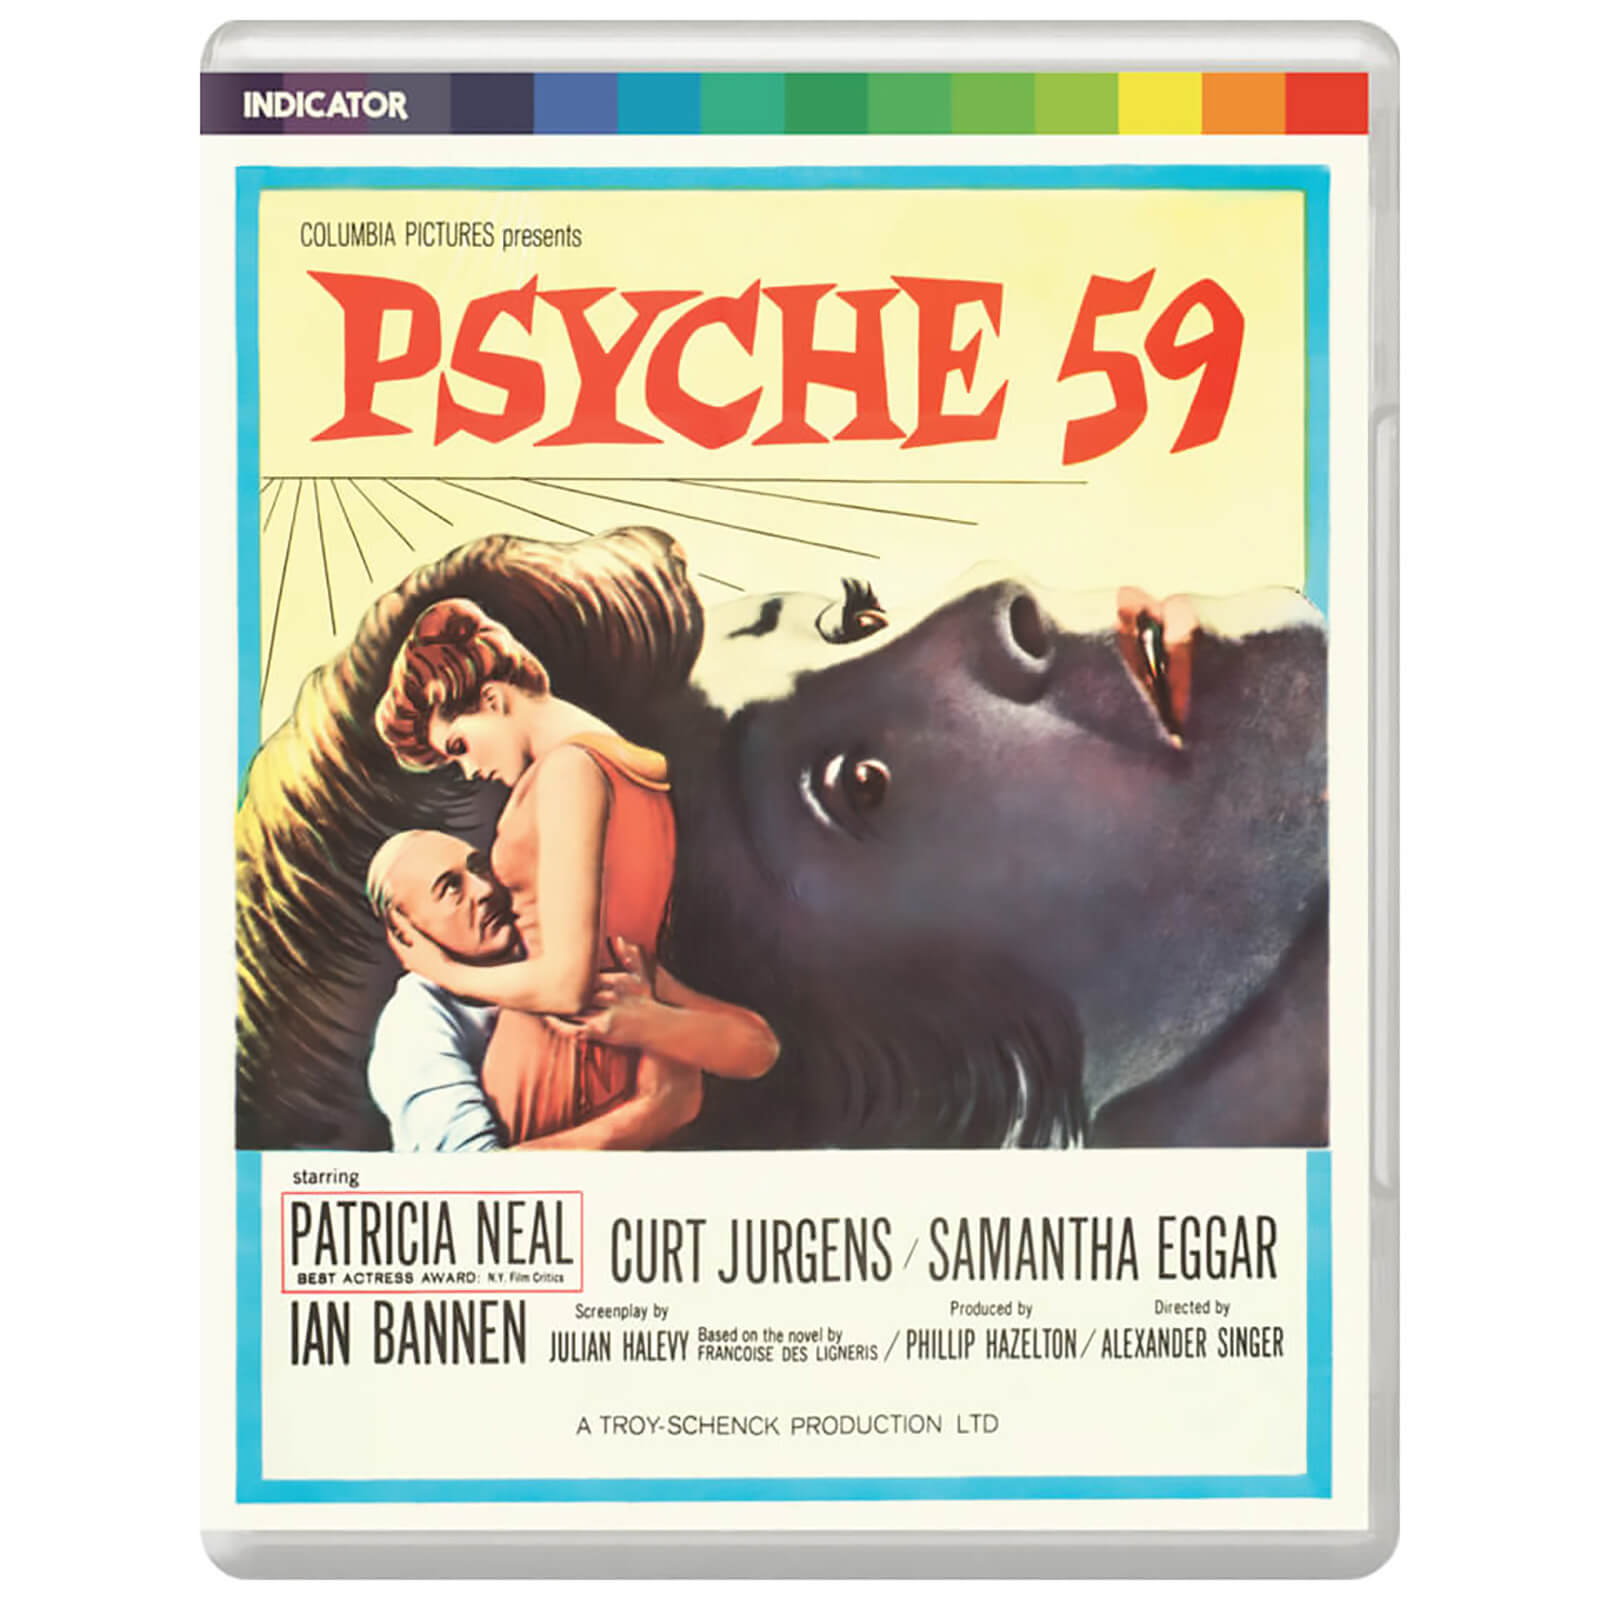 Psyche 59 - Limited Edition